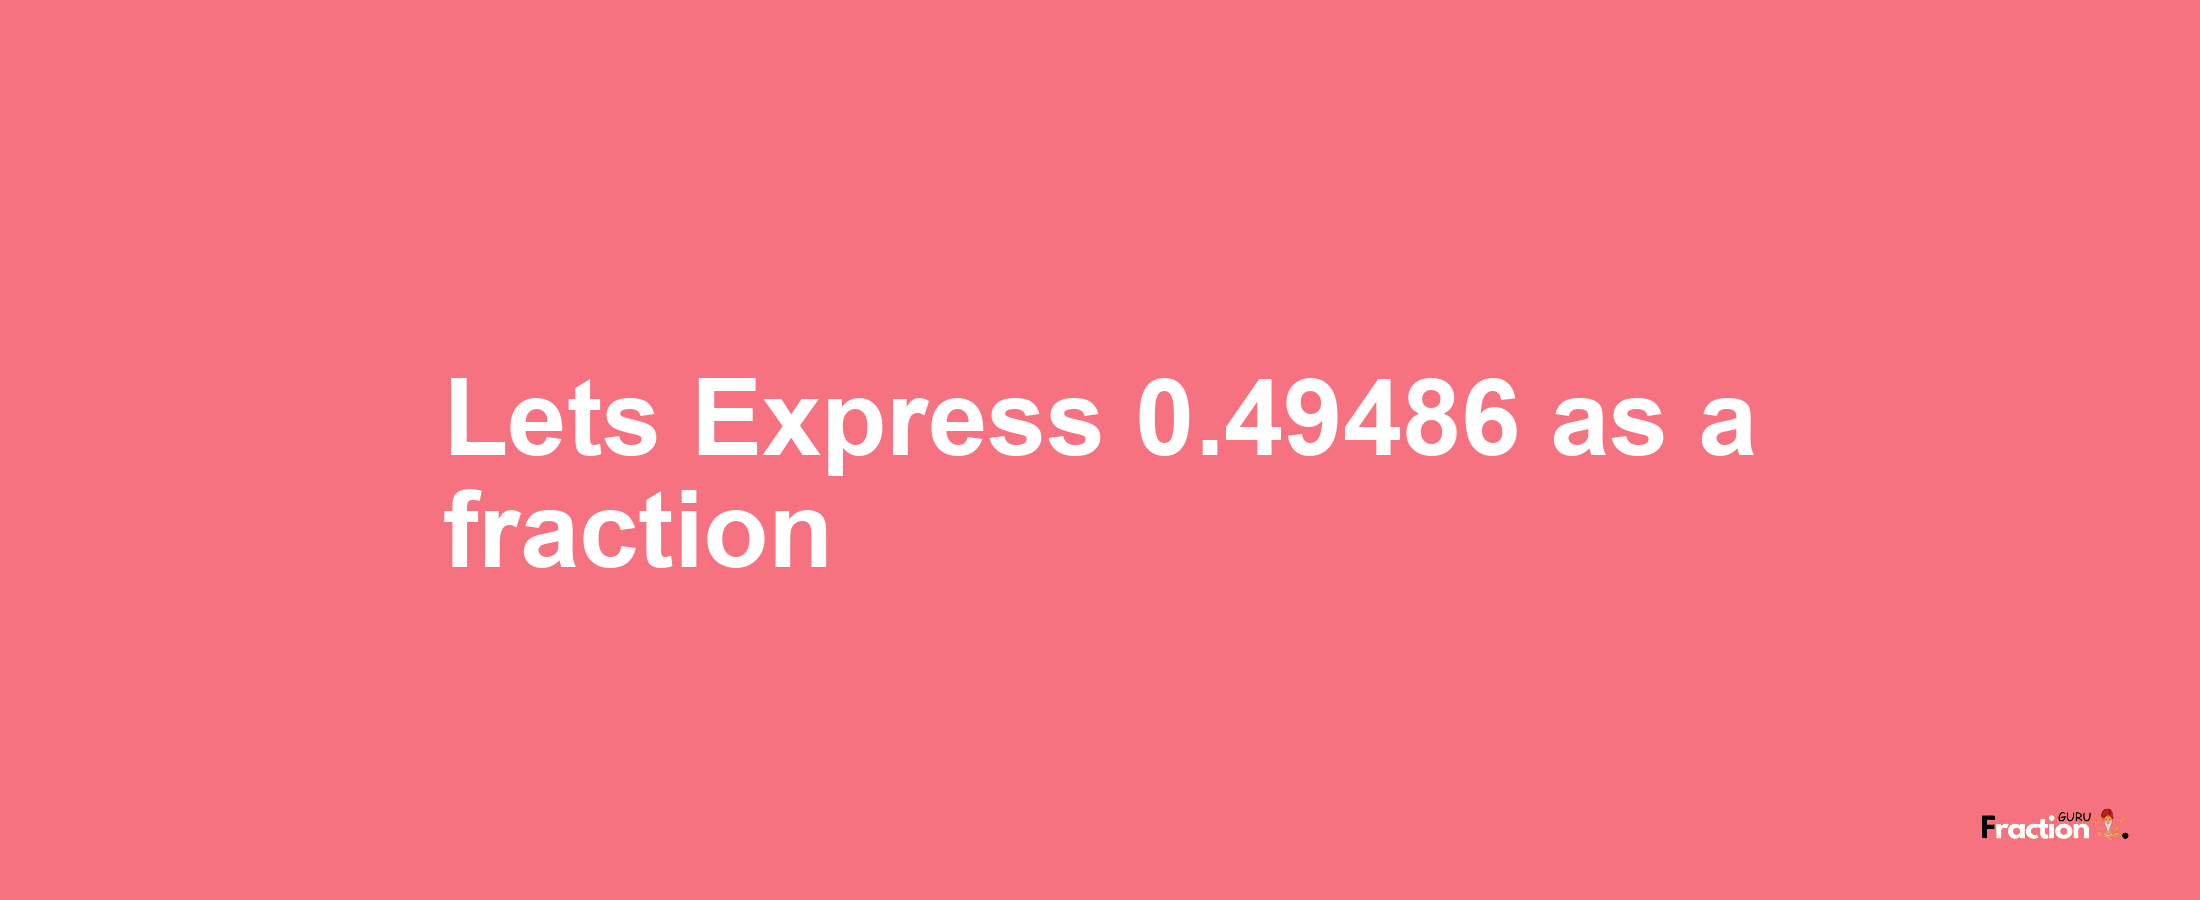 Lets Express 0.49486 as afraction